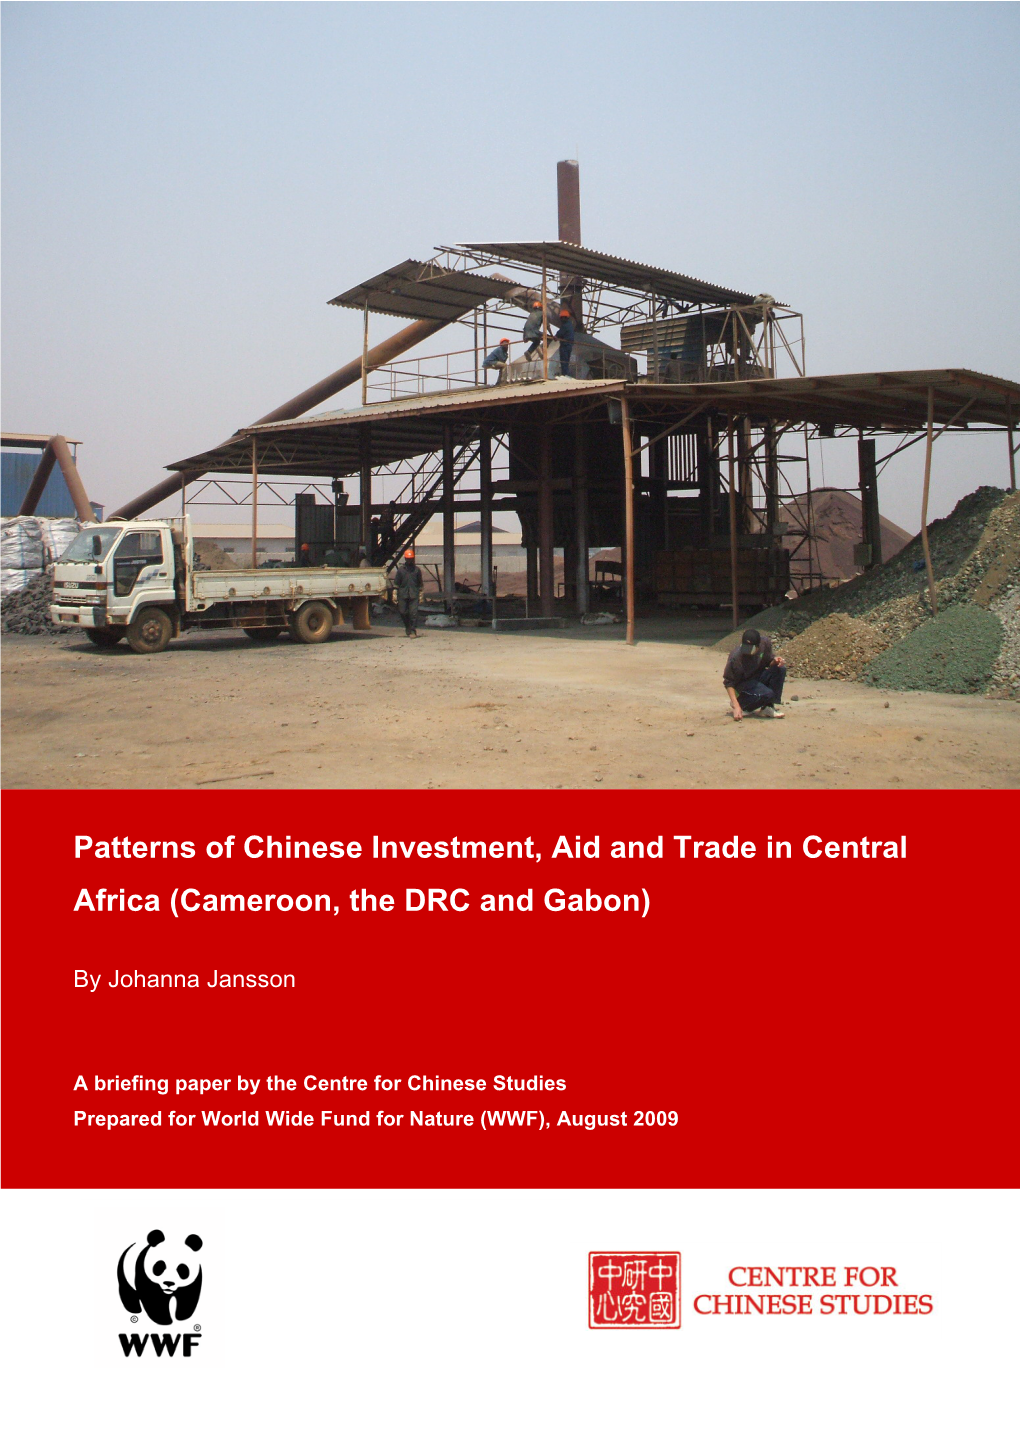 Patterns of Chinese Investment, Aid and Trade in Central Africa